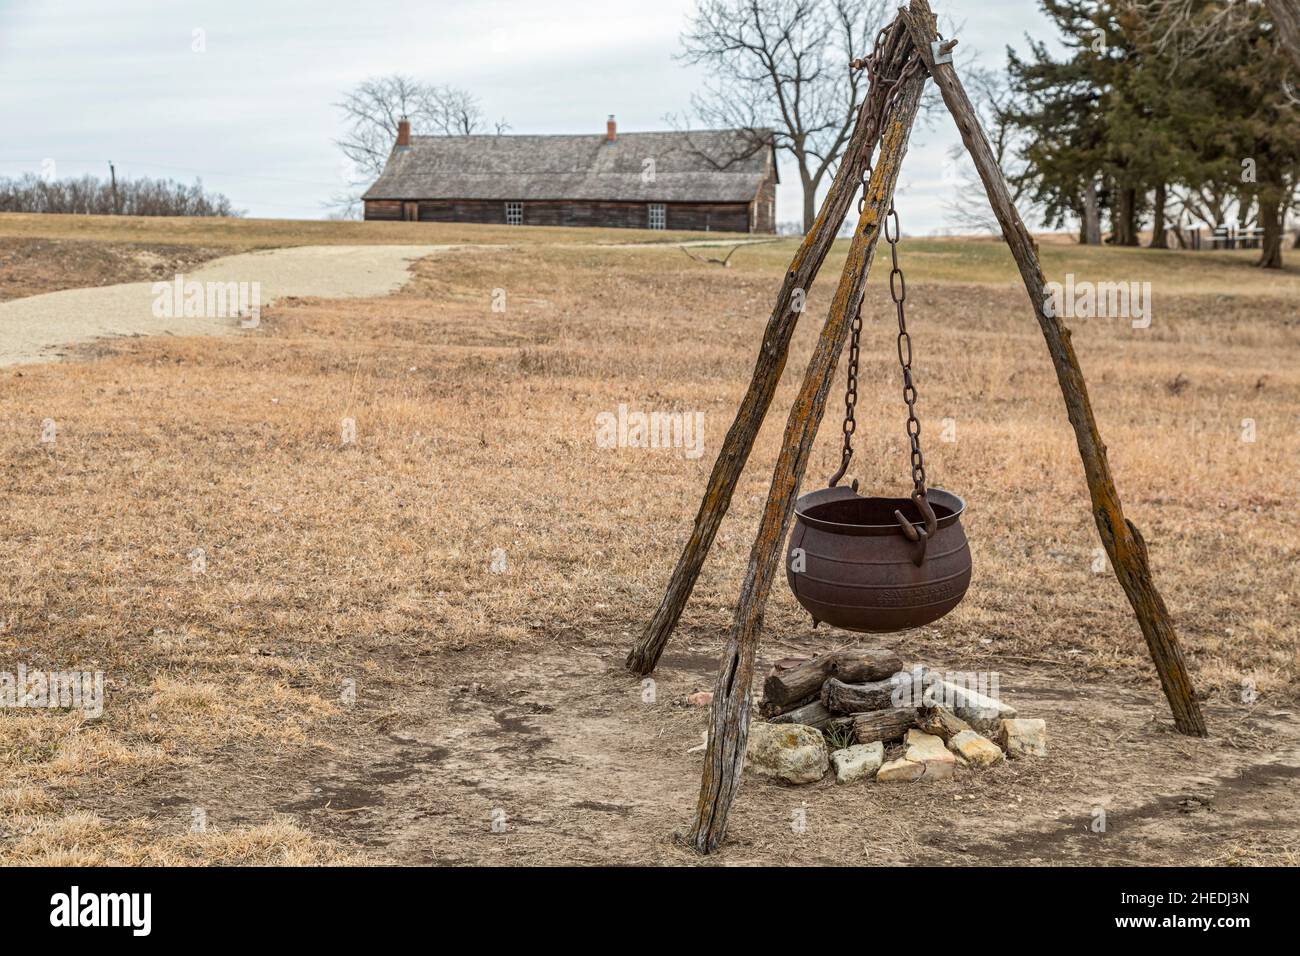 Hanover, Kansas - A camping and cooking area at the Hollenberg Pony Express Station. The Pony Express delivered mail from Missouri to California in 18 Stock Photo